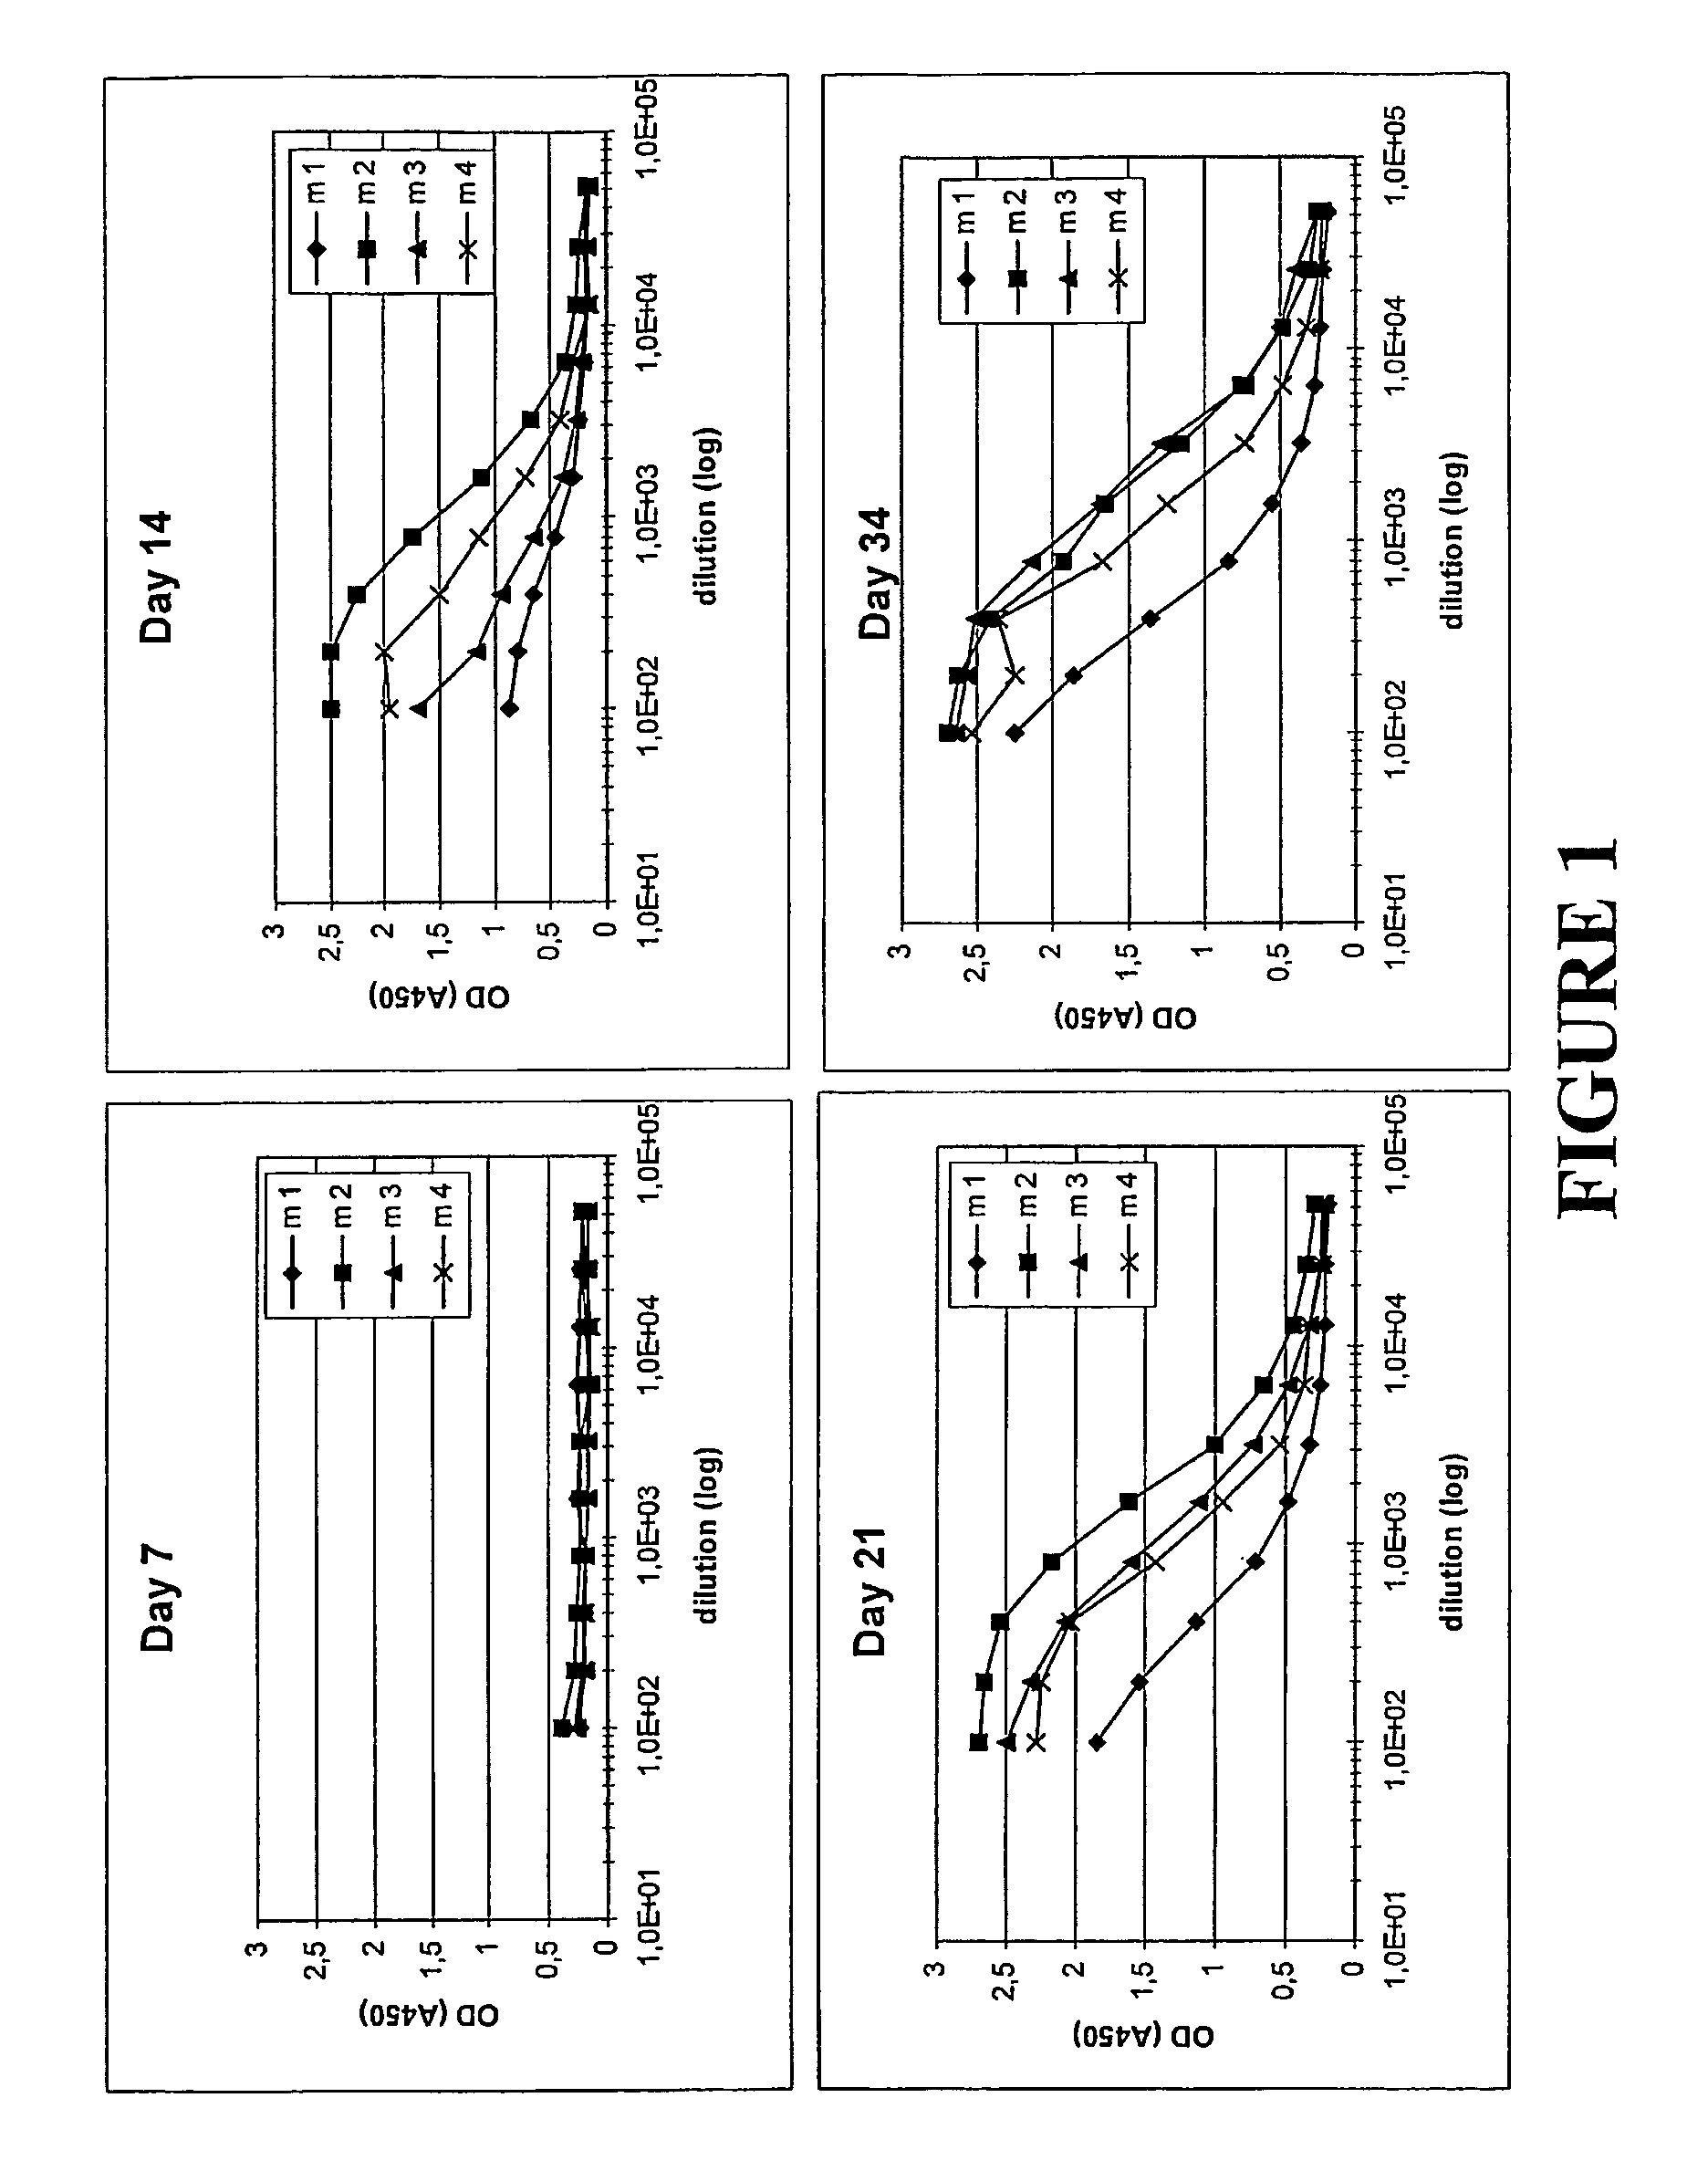 Method for reducing the immune response to a biologically active protein